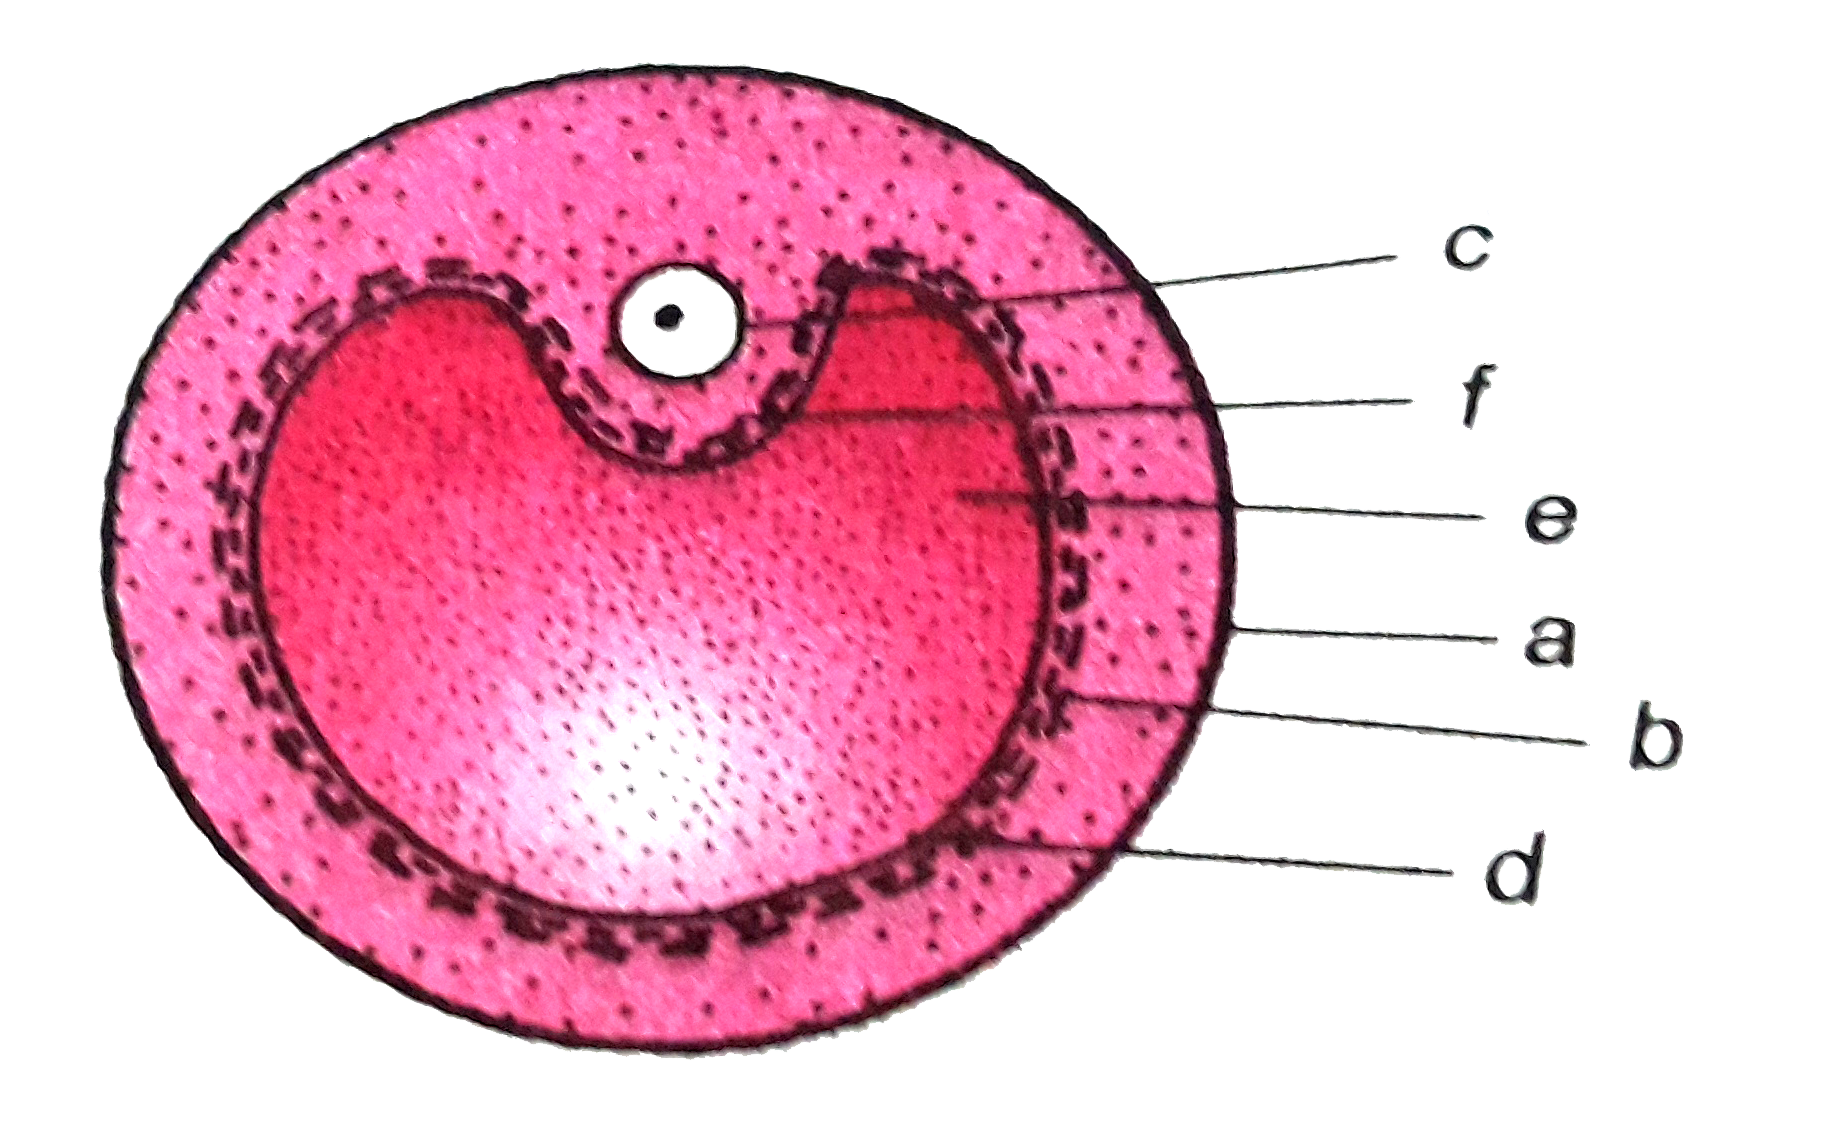 In the diagram of section of Graafian follicle. Different parts are indicated by alphabeta. Choose the correct combination